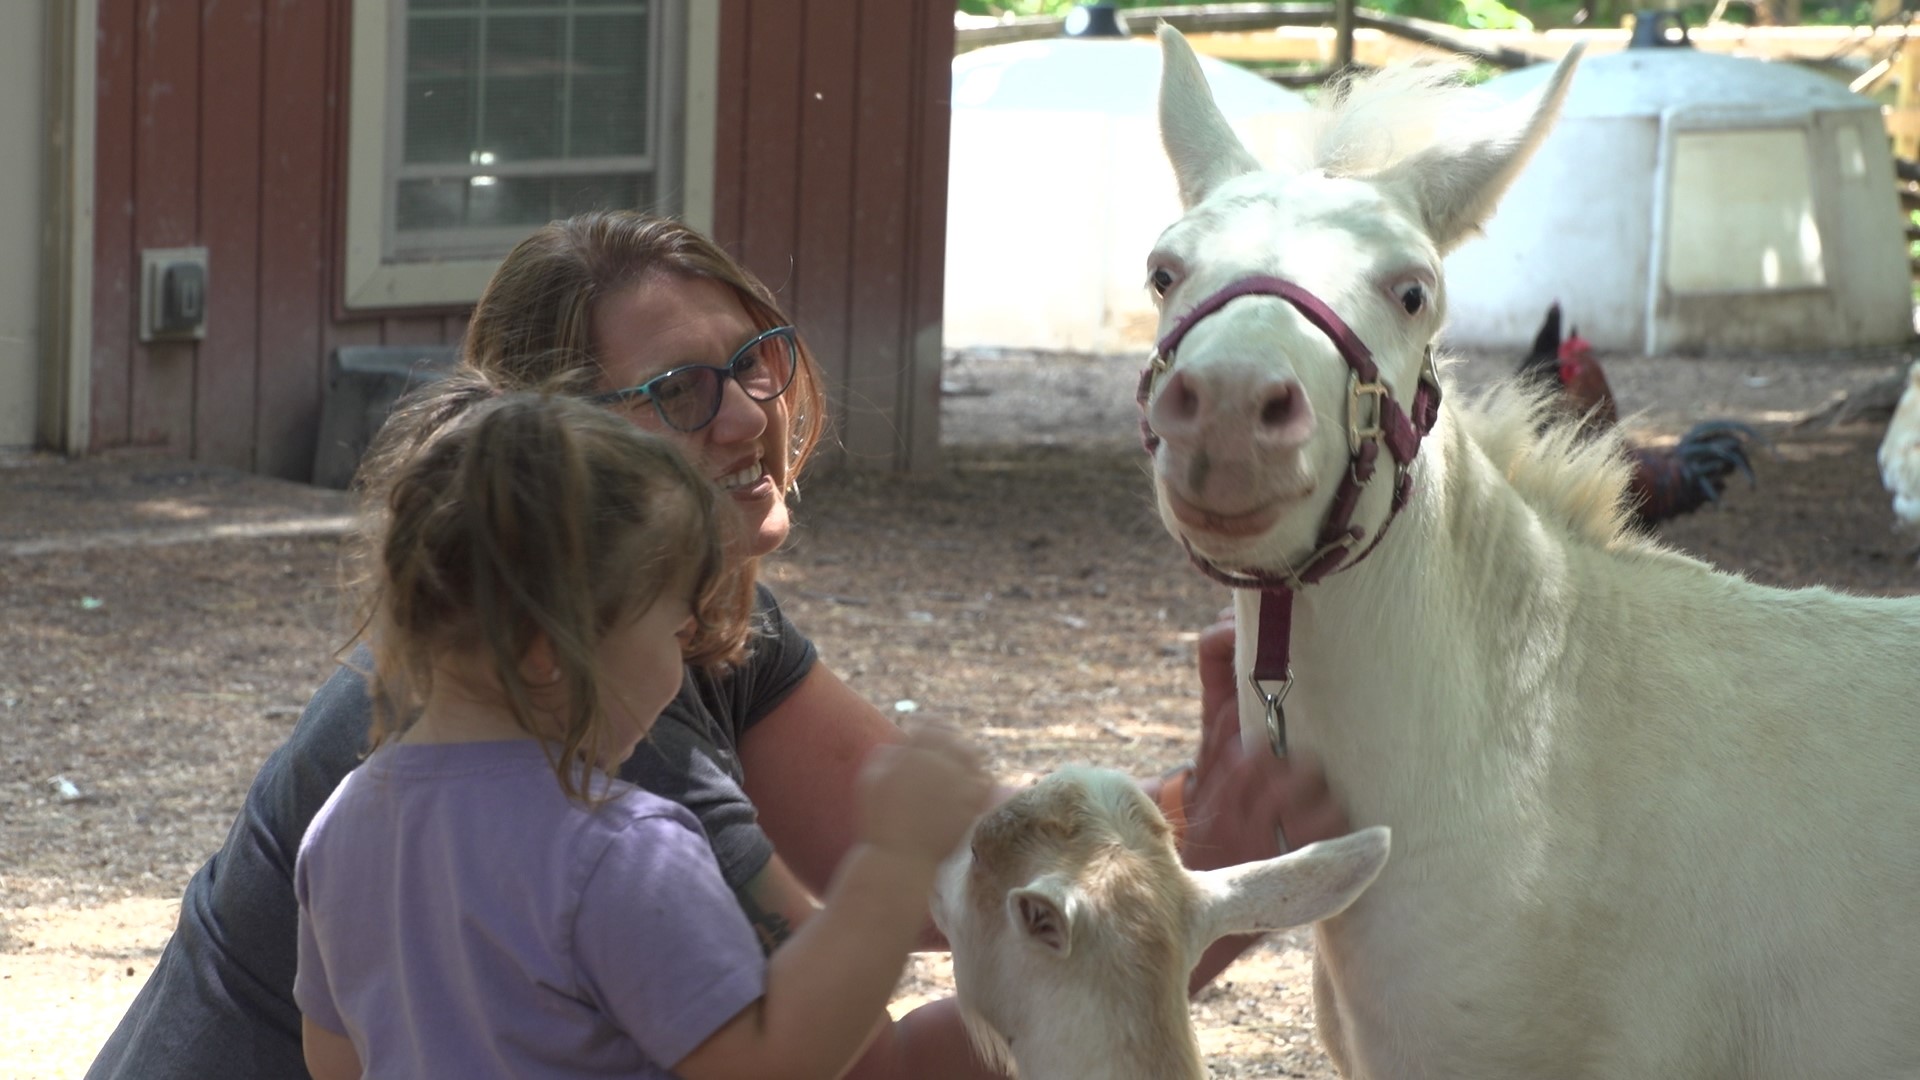 This animal sanctuary in Medina has seen a recent spike in the number of animals in need of help.